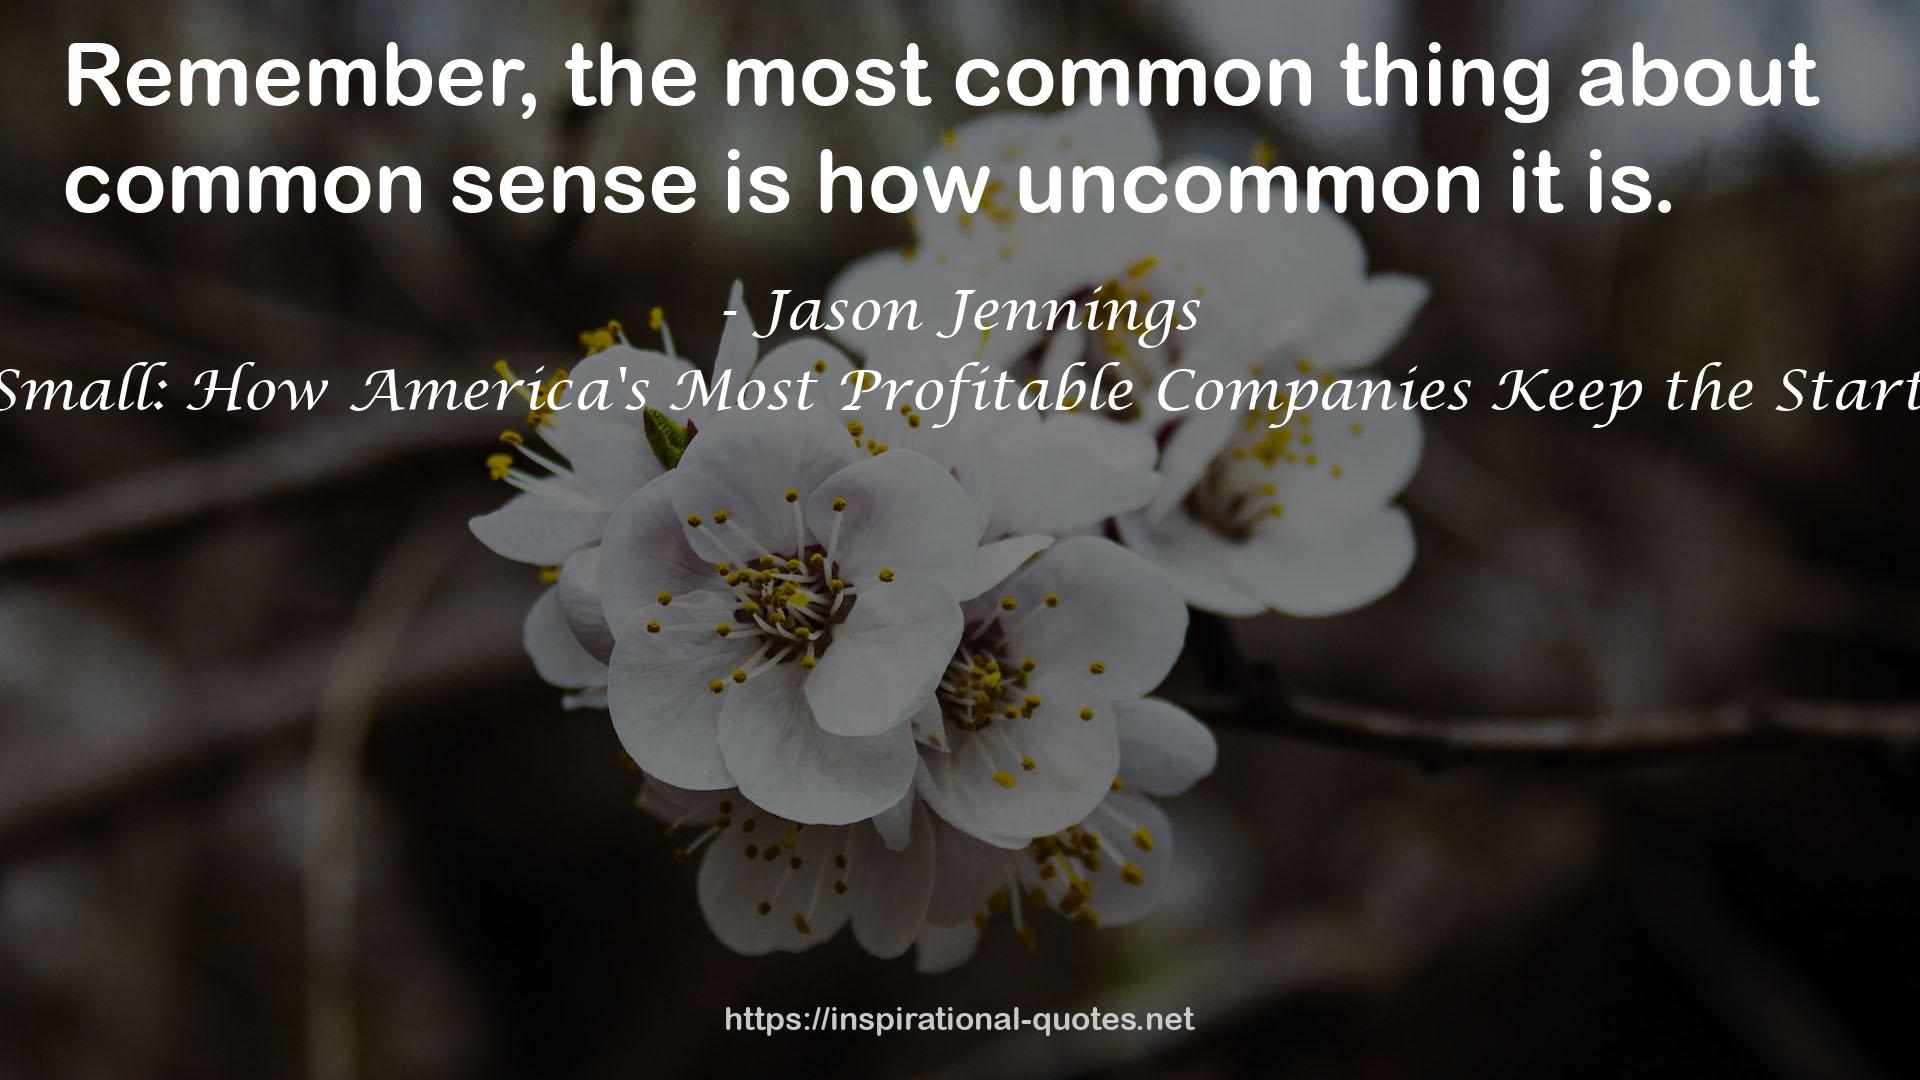 Think Big, Act Small: How America's Most Profitable Companies Keep the Start-up Spirit Alive QUOTES